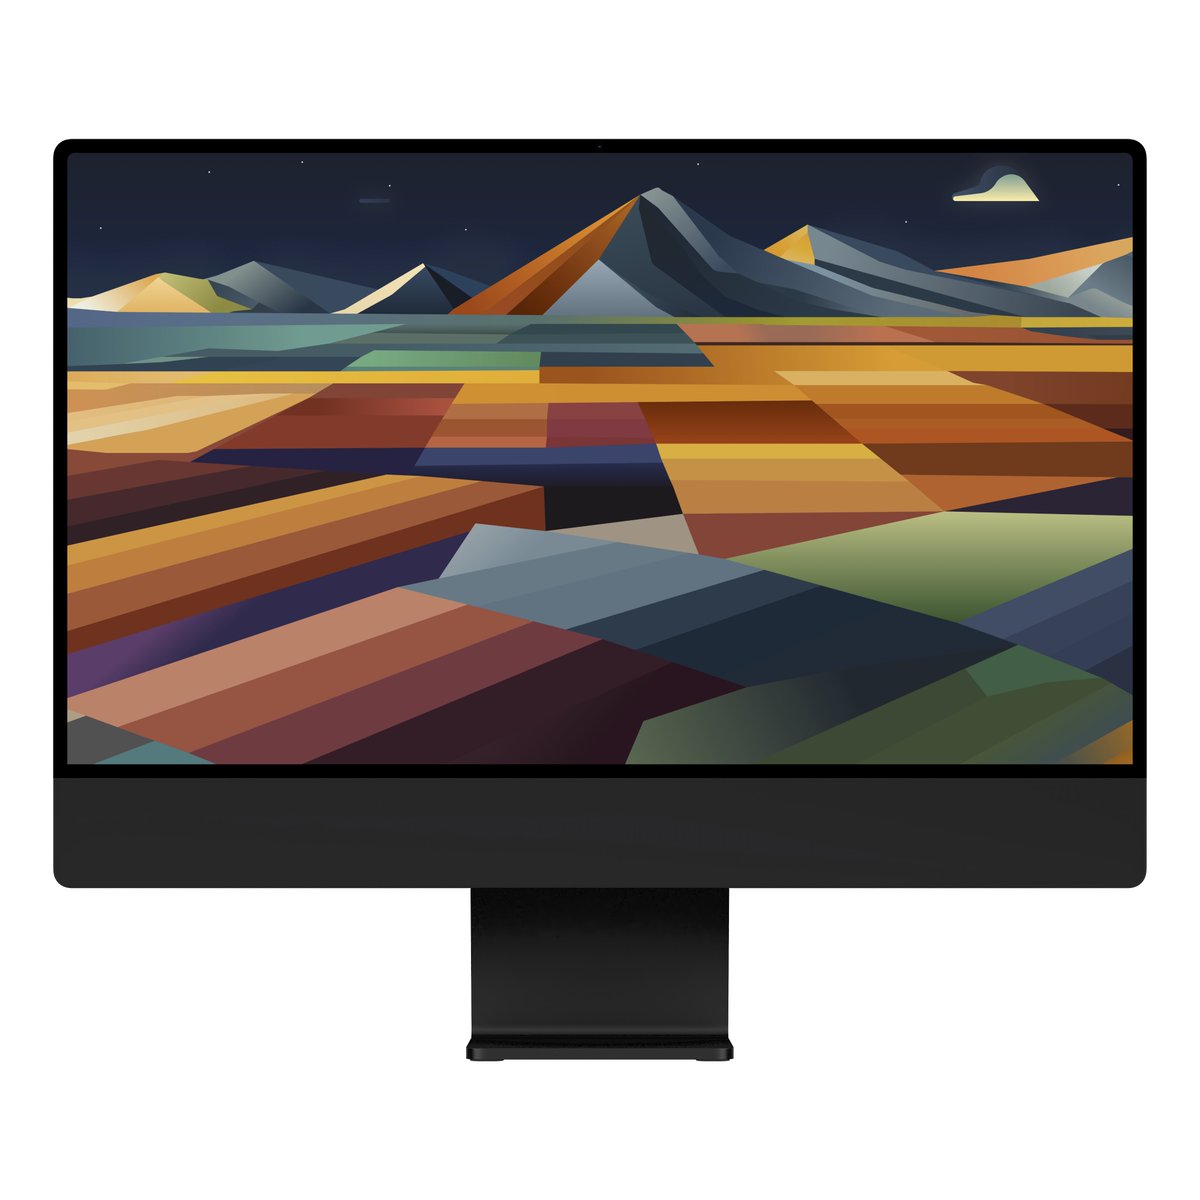 Personally, I would like to see darker colors and black bezels on the iMac.